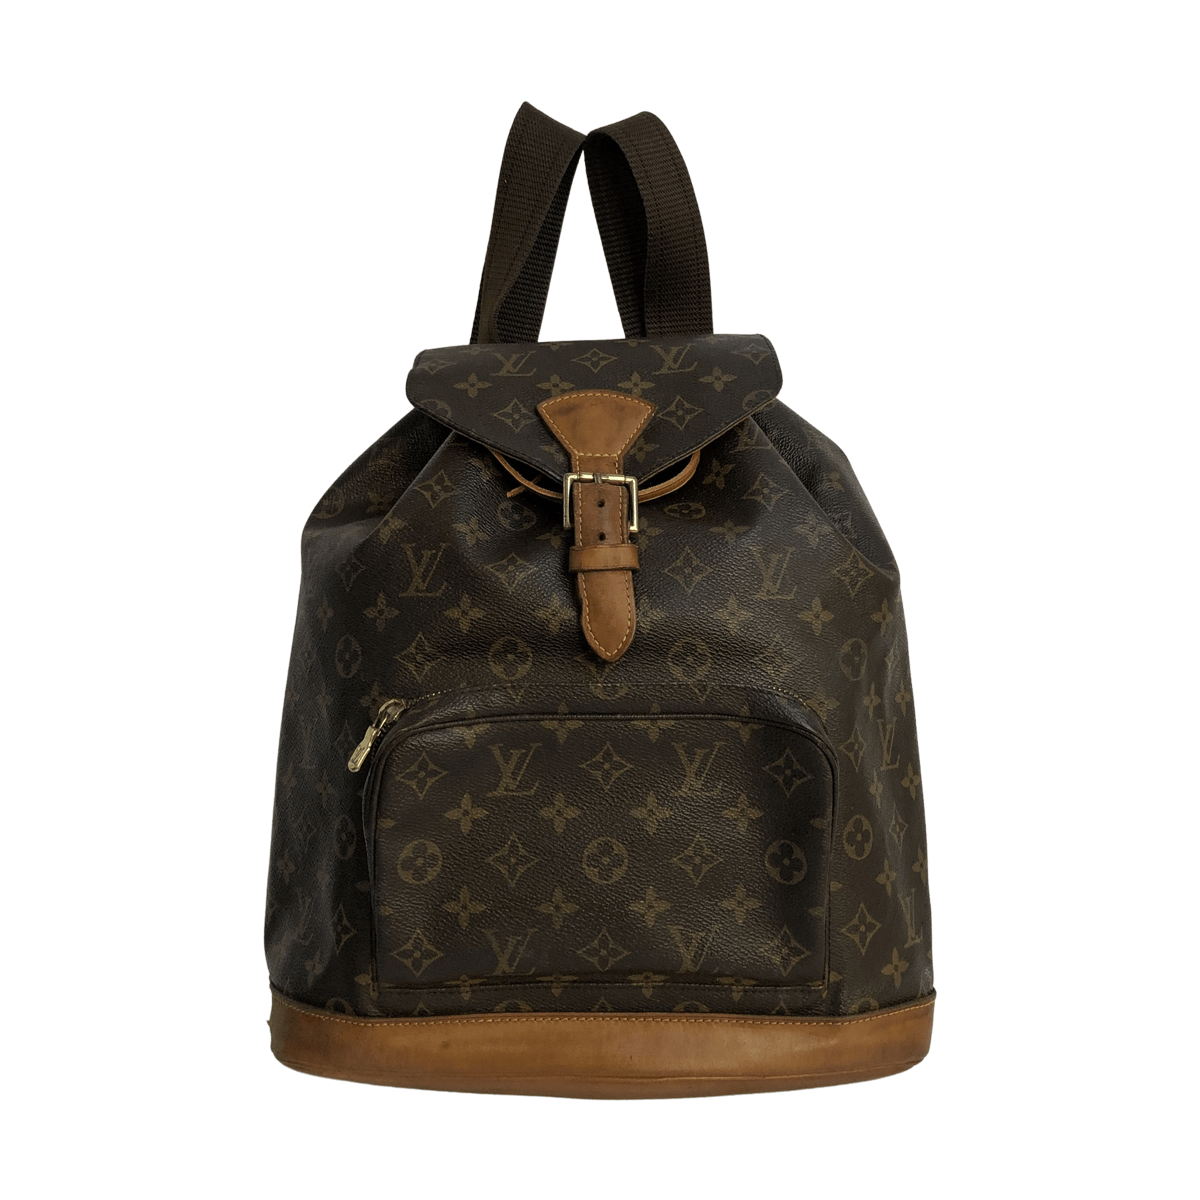 Louis Vuitton Backpack – are good